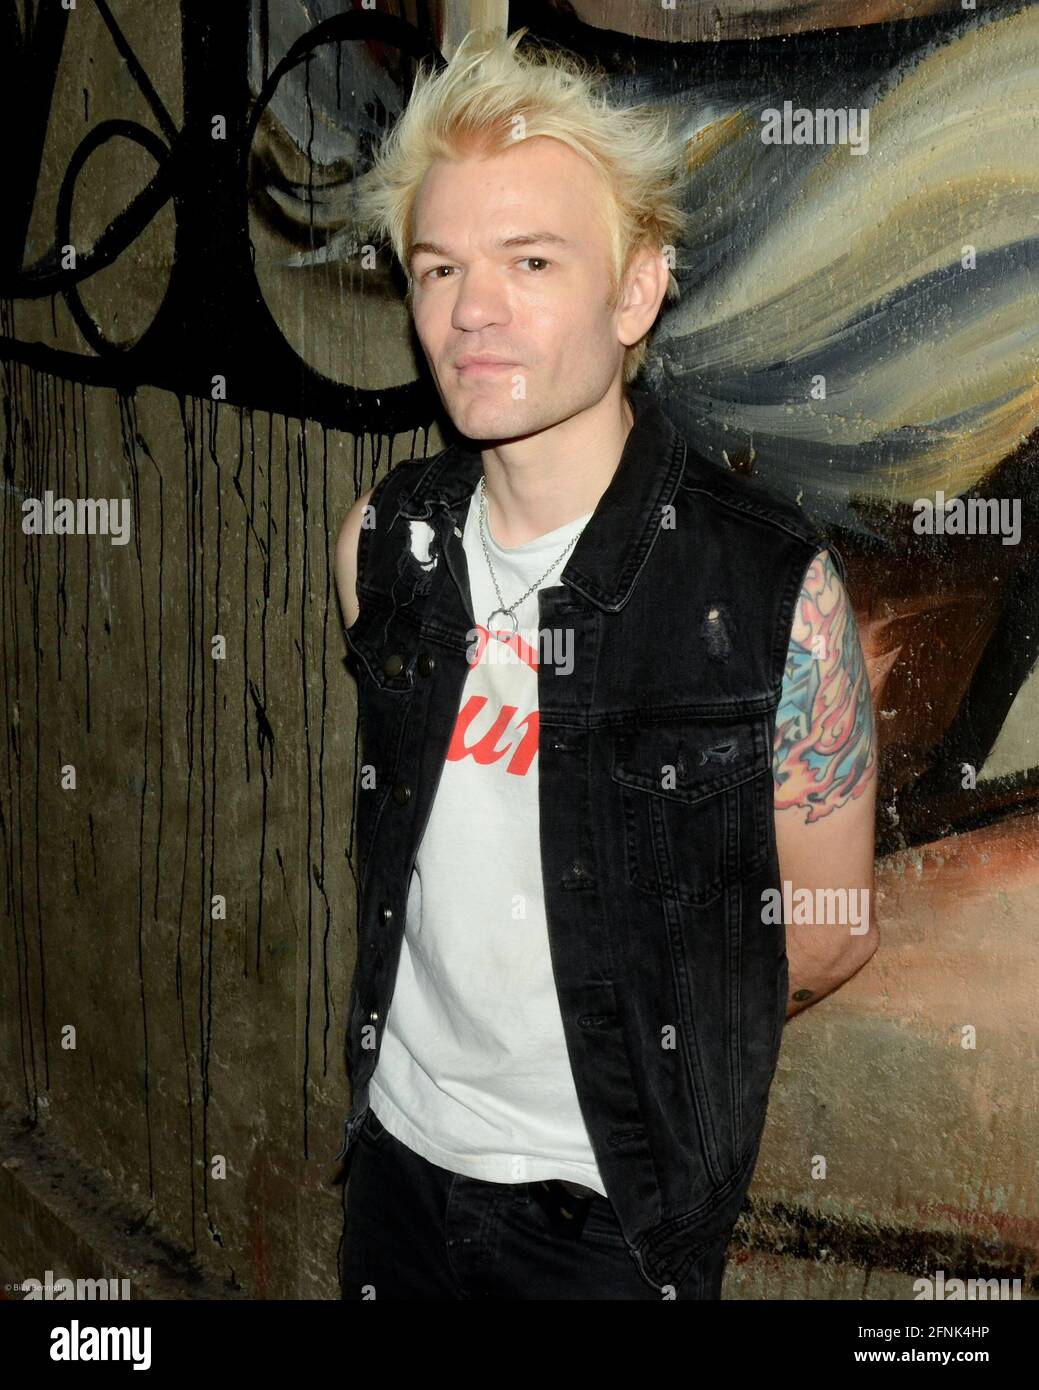 Sum 41 lead singer Deryck Whibley outside Beso Restaurant in Hollywood Los  Angeles, California - 05.08.09 Stock Photo - Alamy